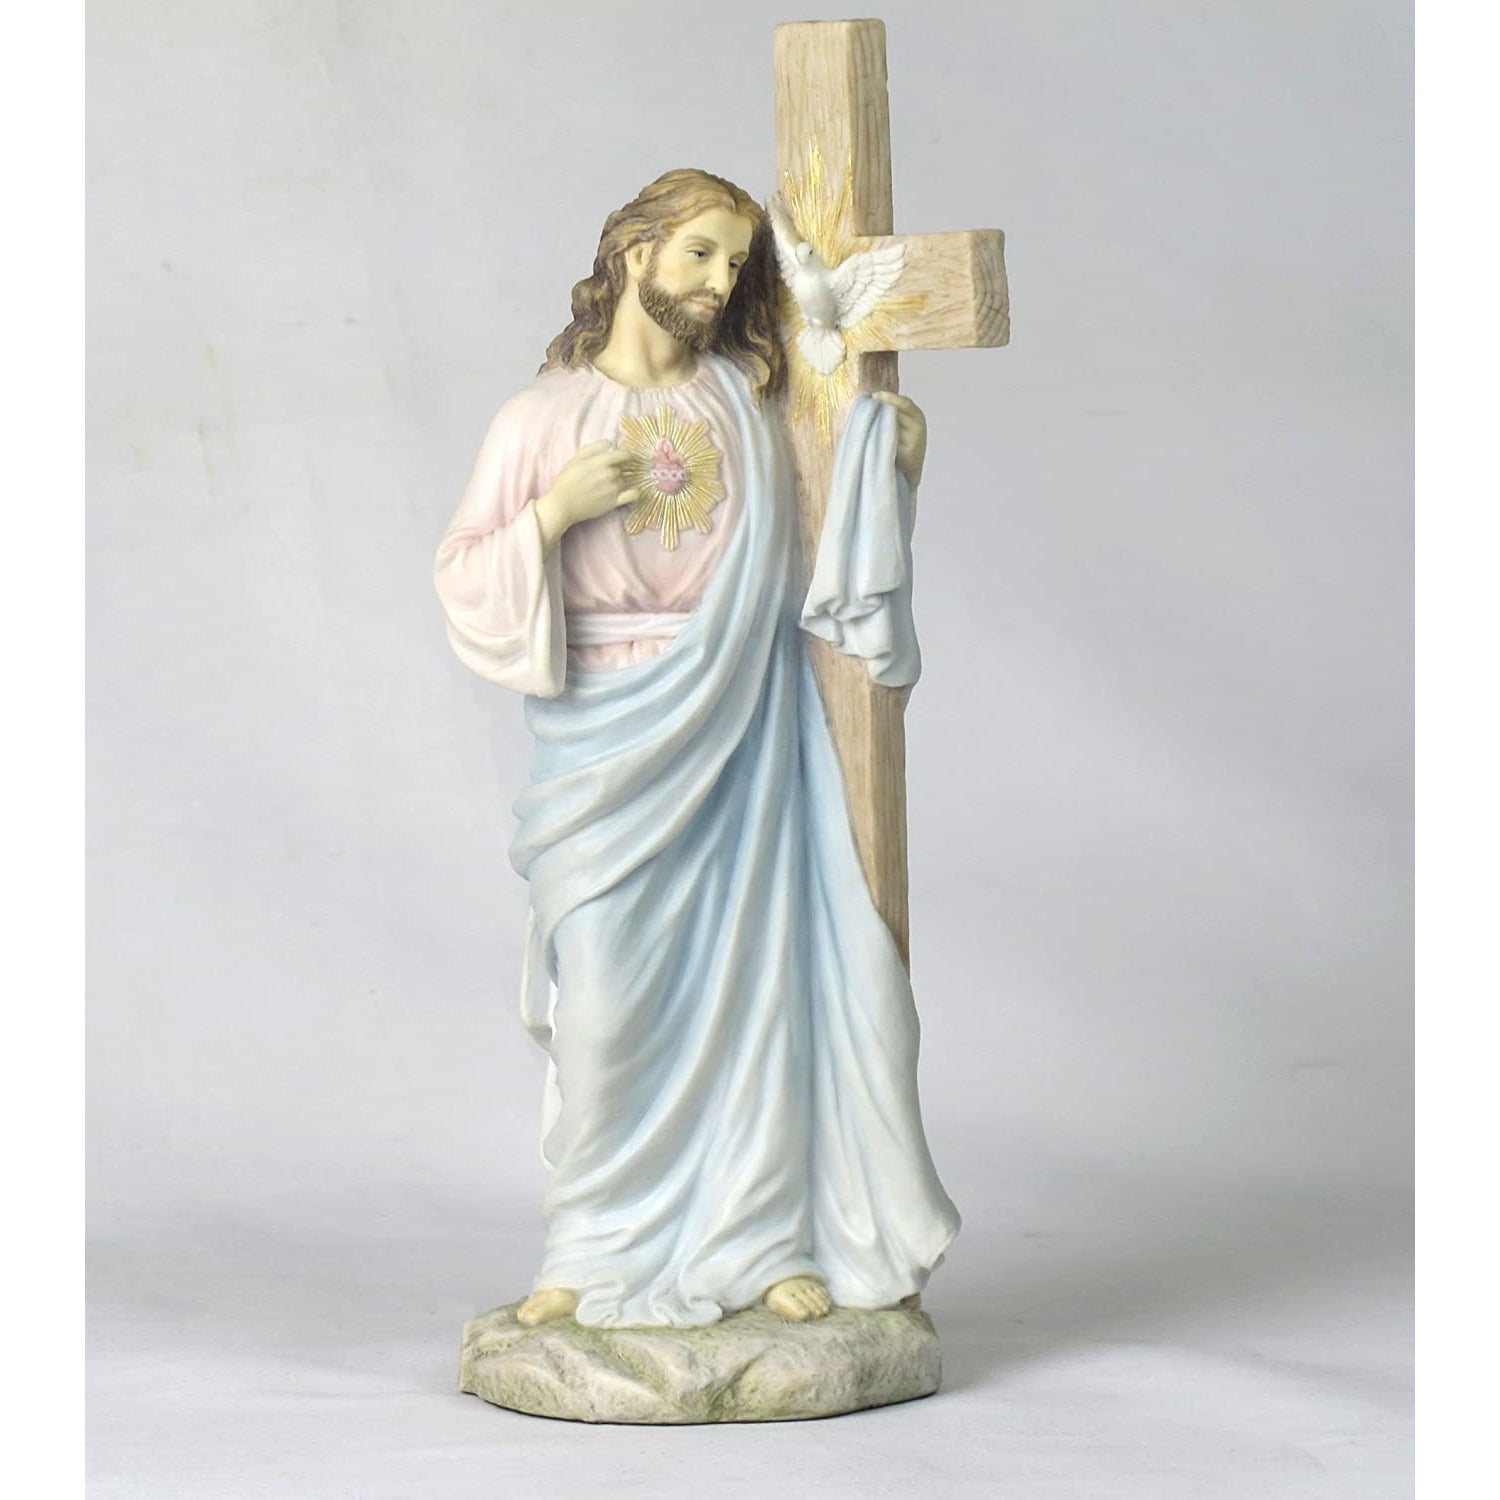 US 11.25" Jesus with Sacred Heart Leaning on The Dove Cross Figurine